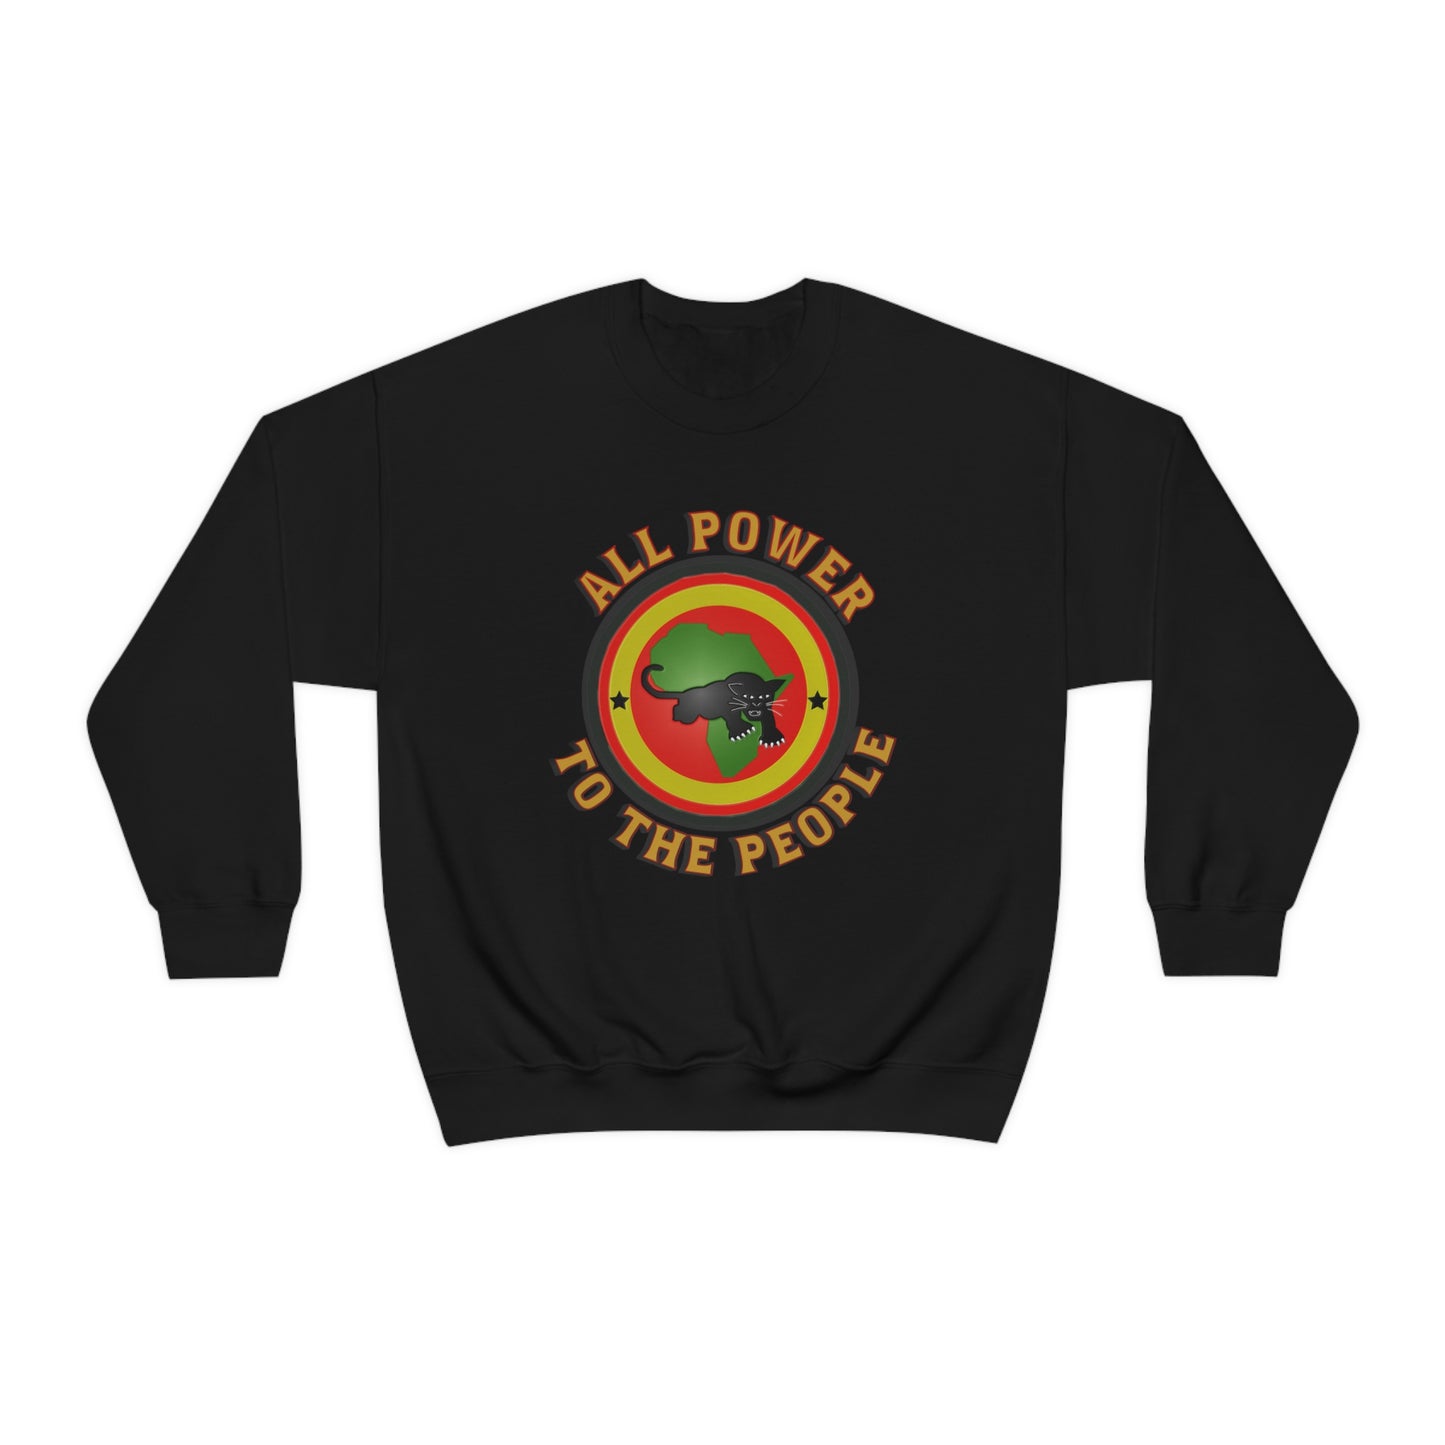 Original Black Panther Party Logo Tee - Black History Inspired Graphic T-Shirt -- Celebrate African American Heritage